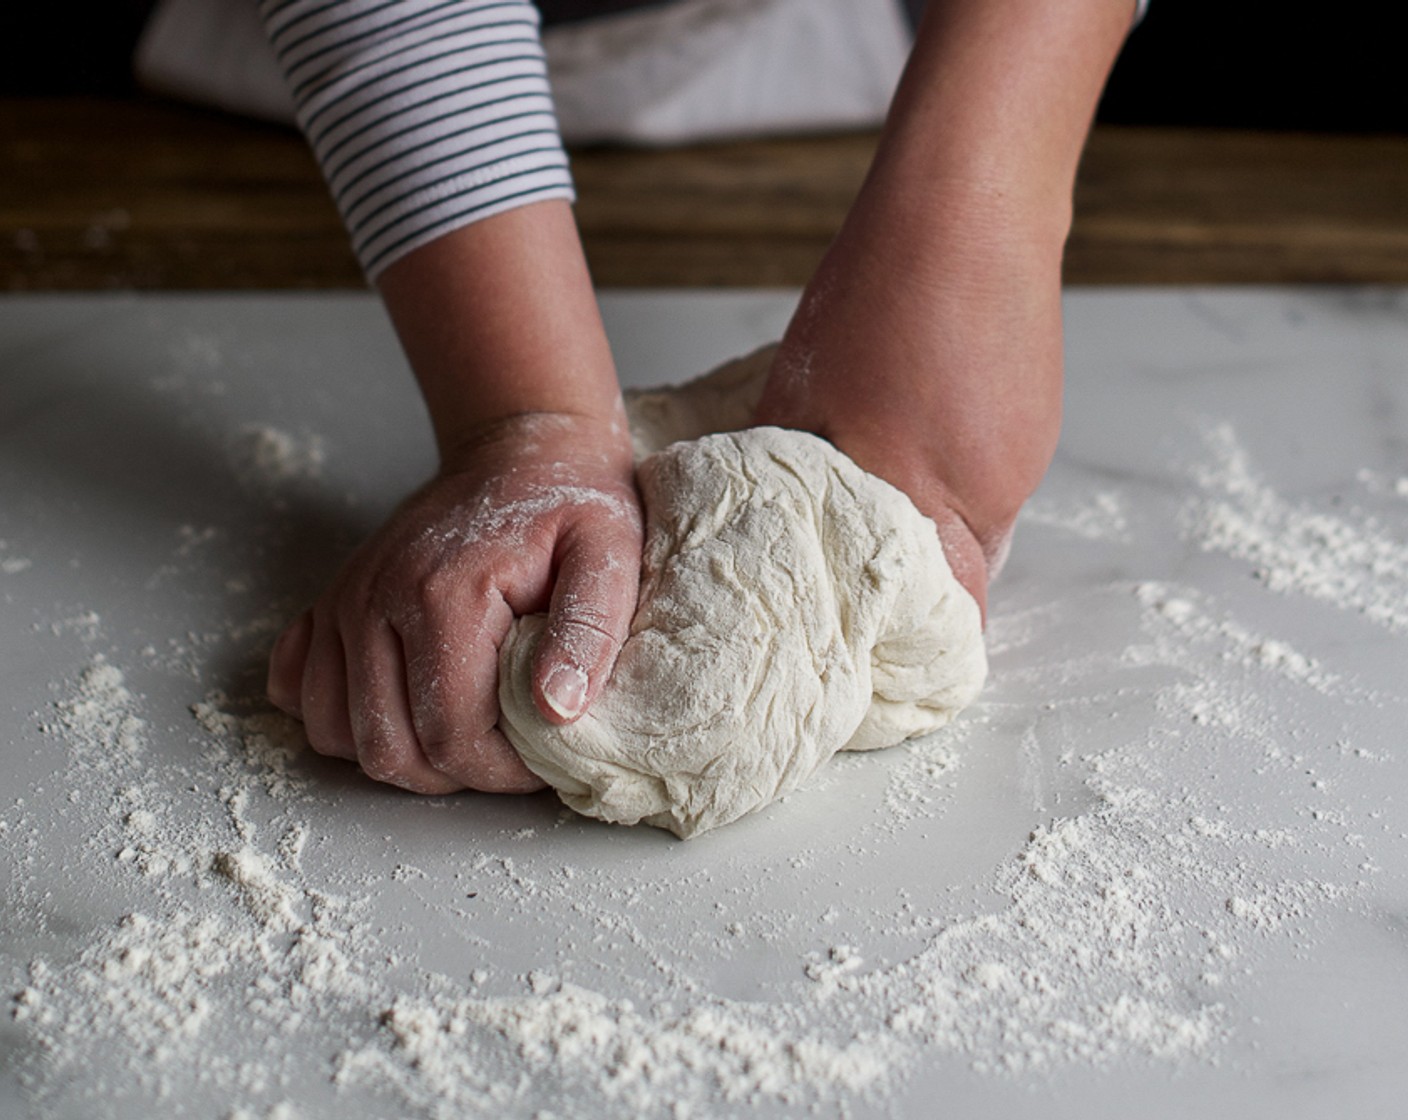 step 2 Using hands, mix the water into the flour until it forms a dough. Turn out onto a floured surface and knead until smooth.